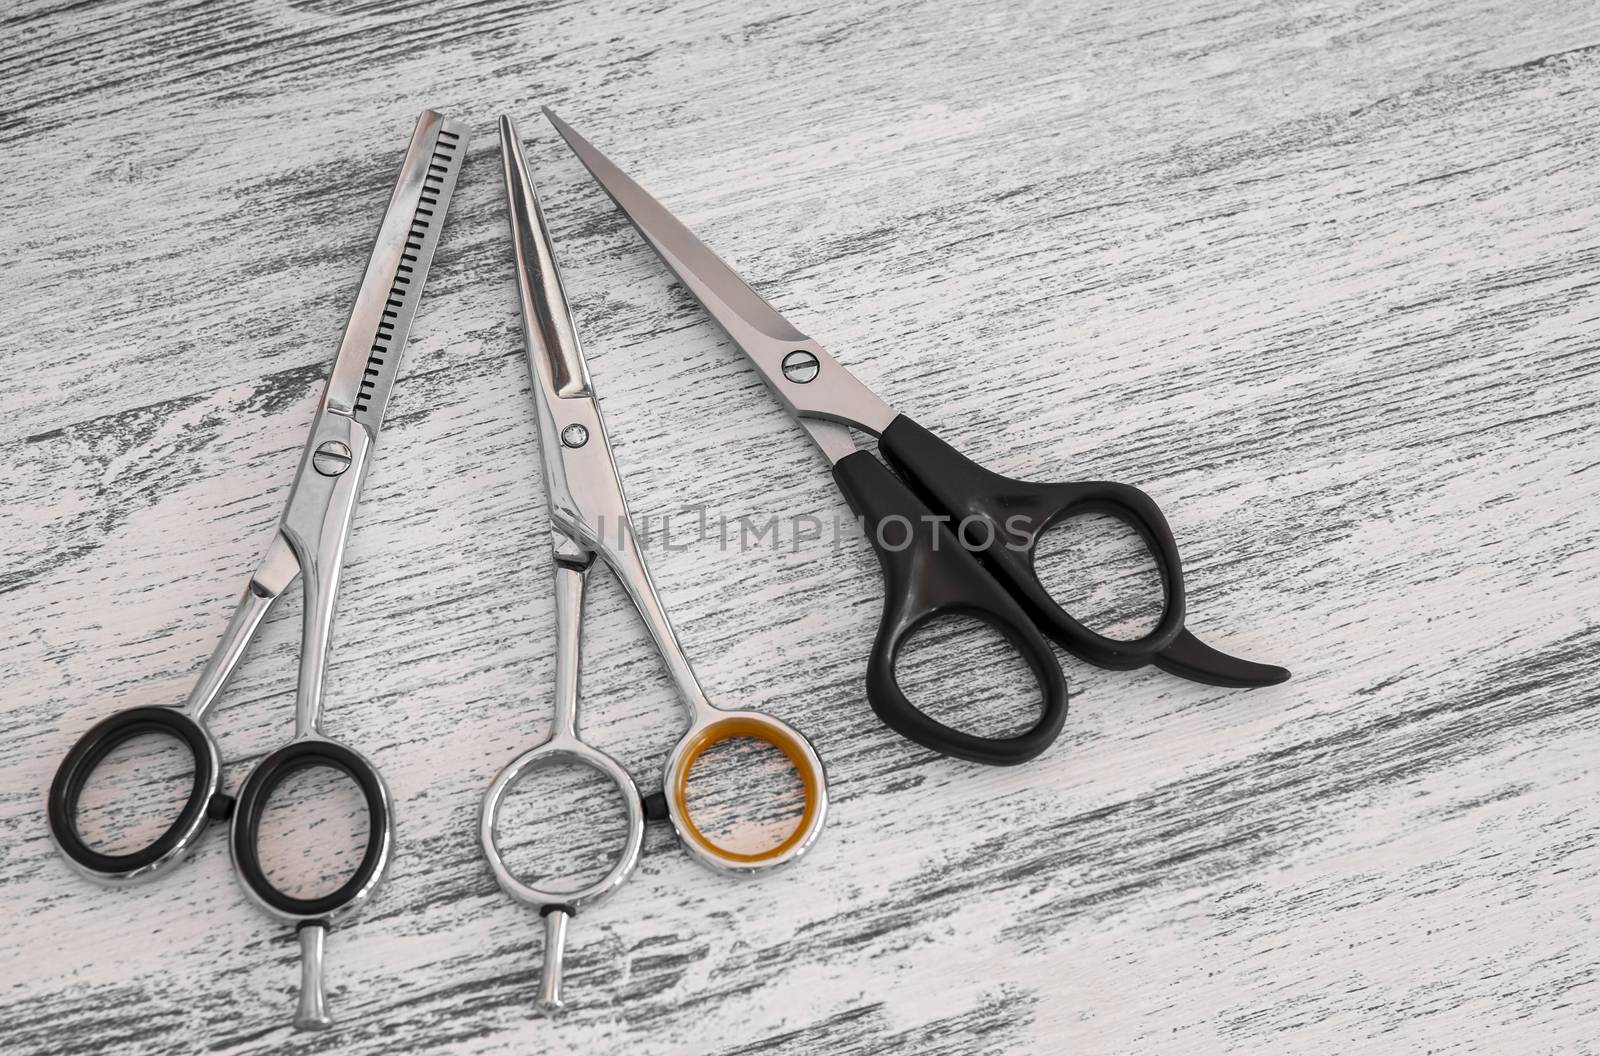 hair cutting scissors for hairdressers in beauty salon on wooden background